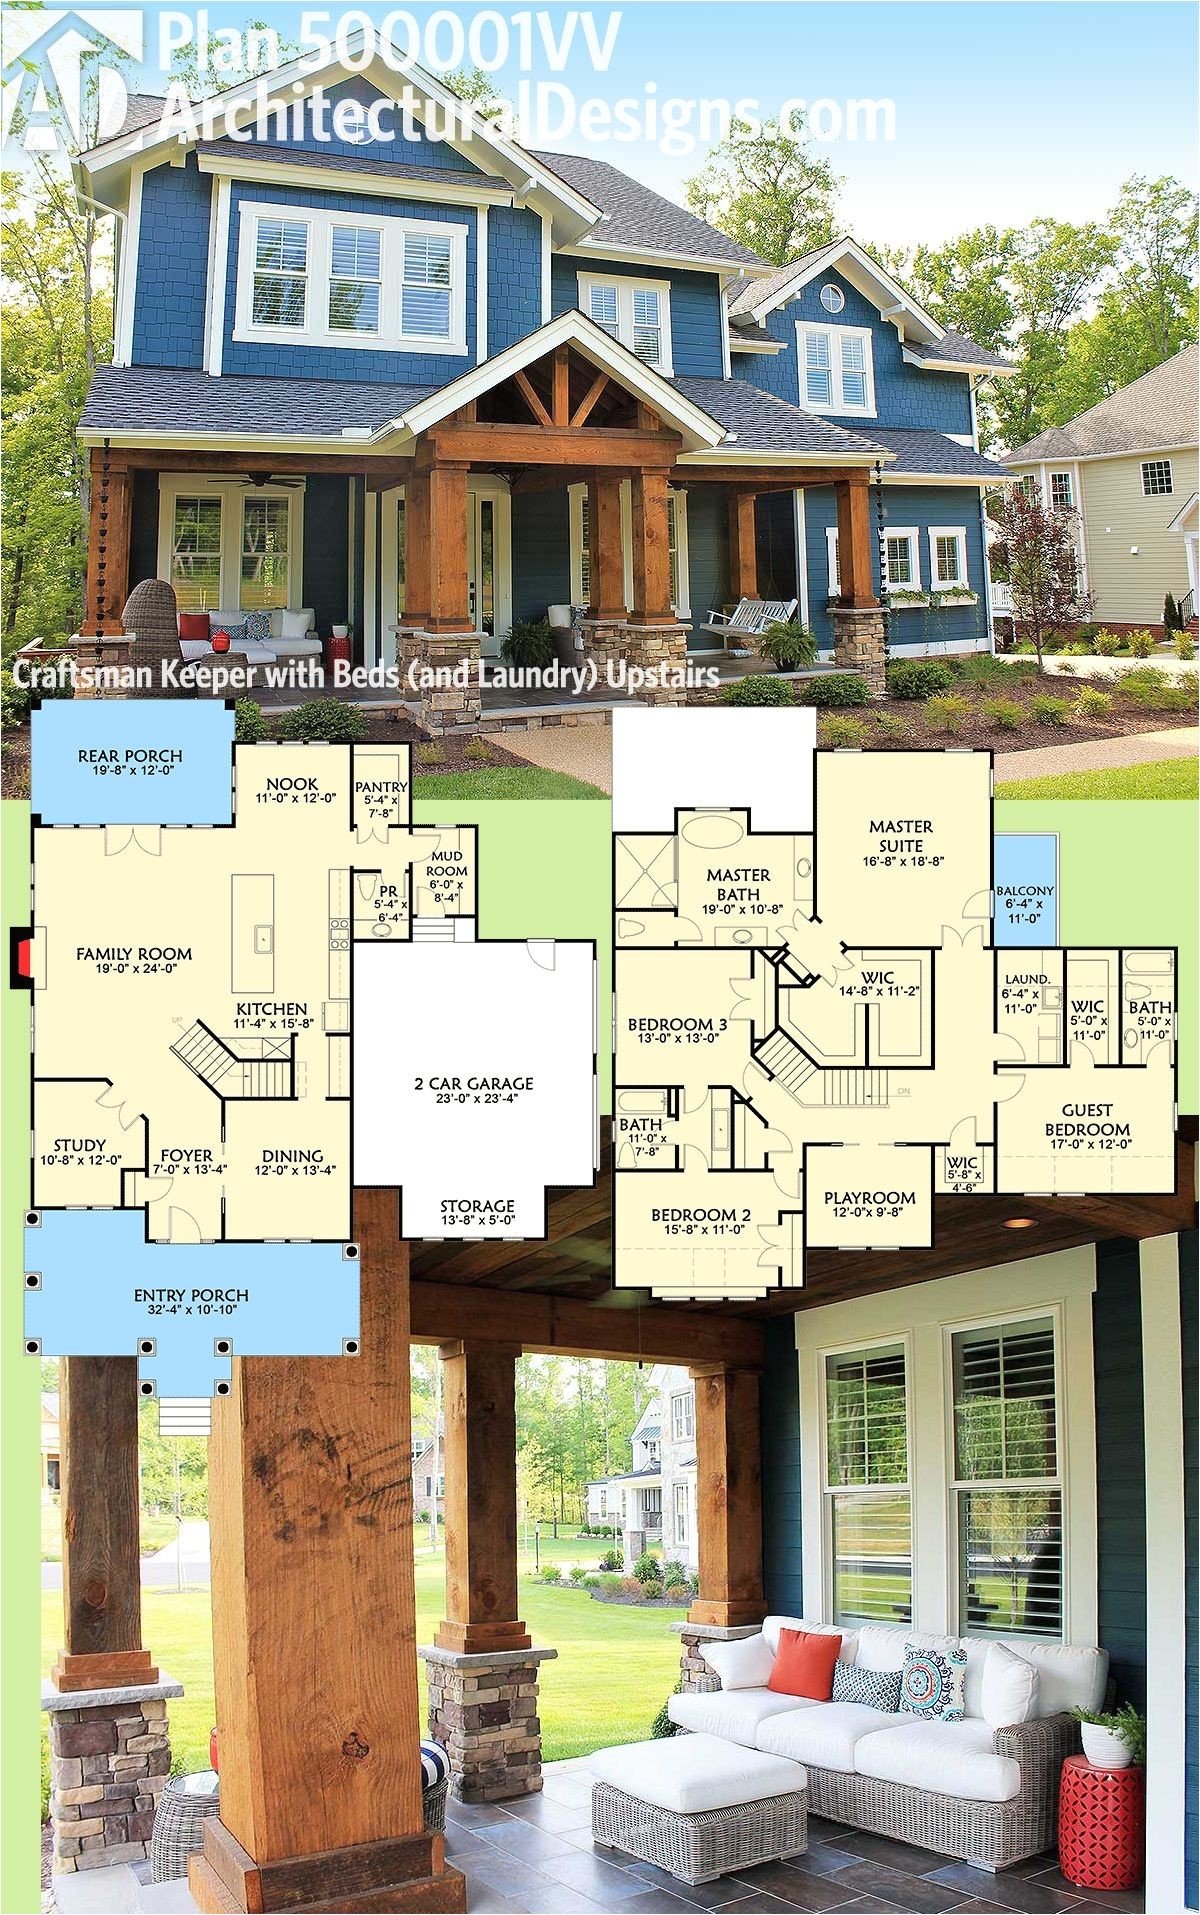 Small Lake House Plans with Screened Porch Small Lake House Plans with Screened Porch Mitch Ginn Lake House